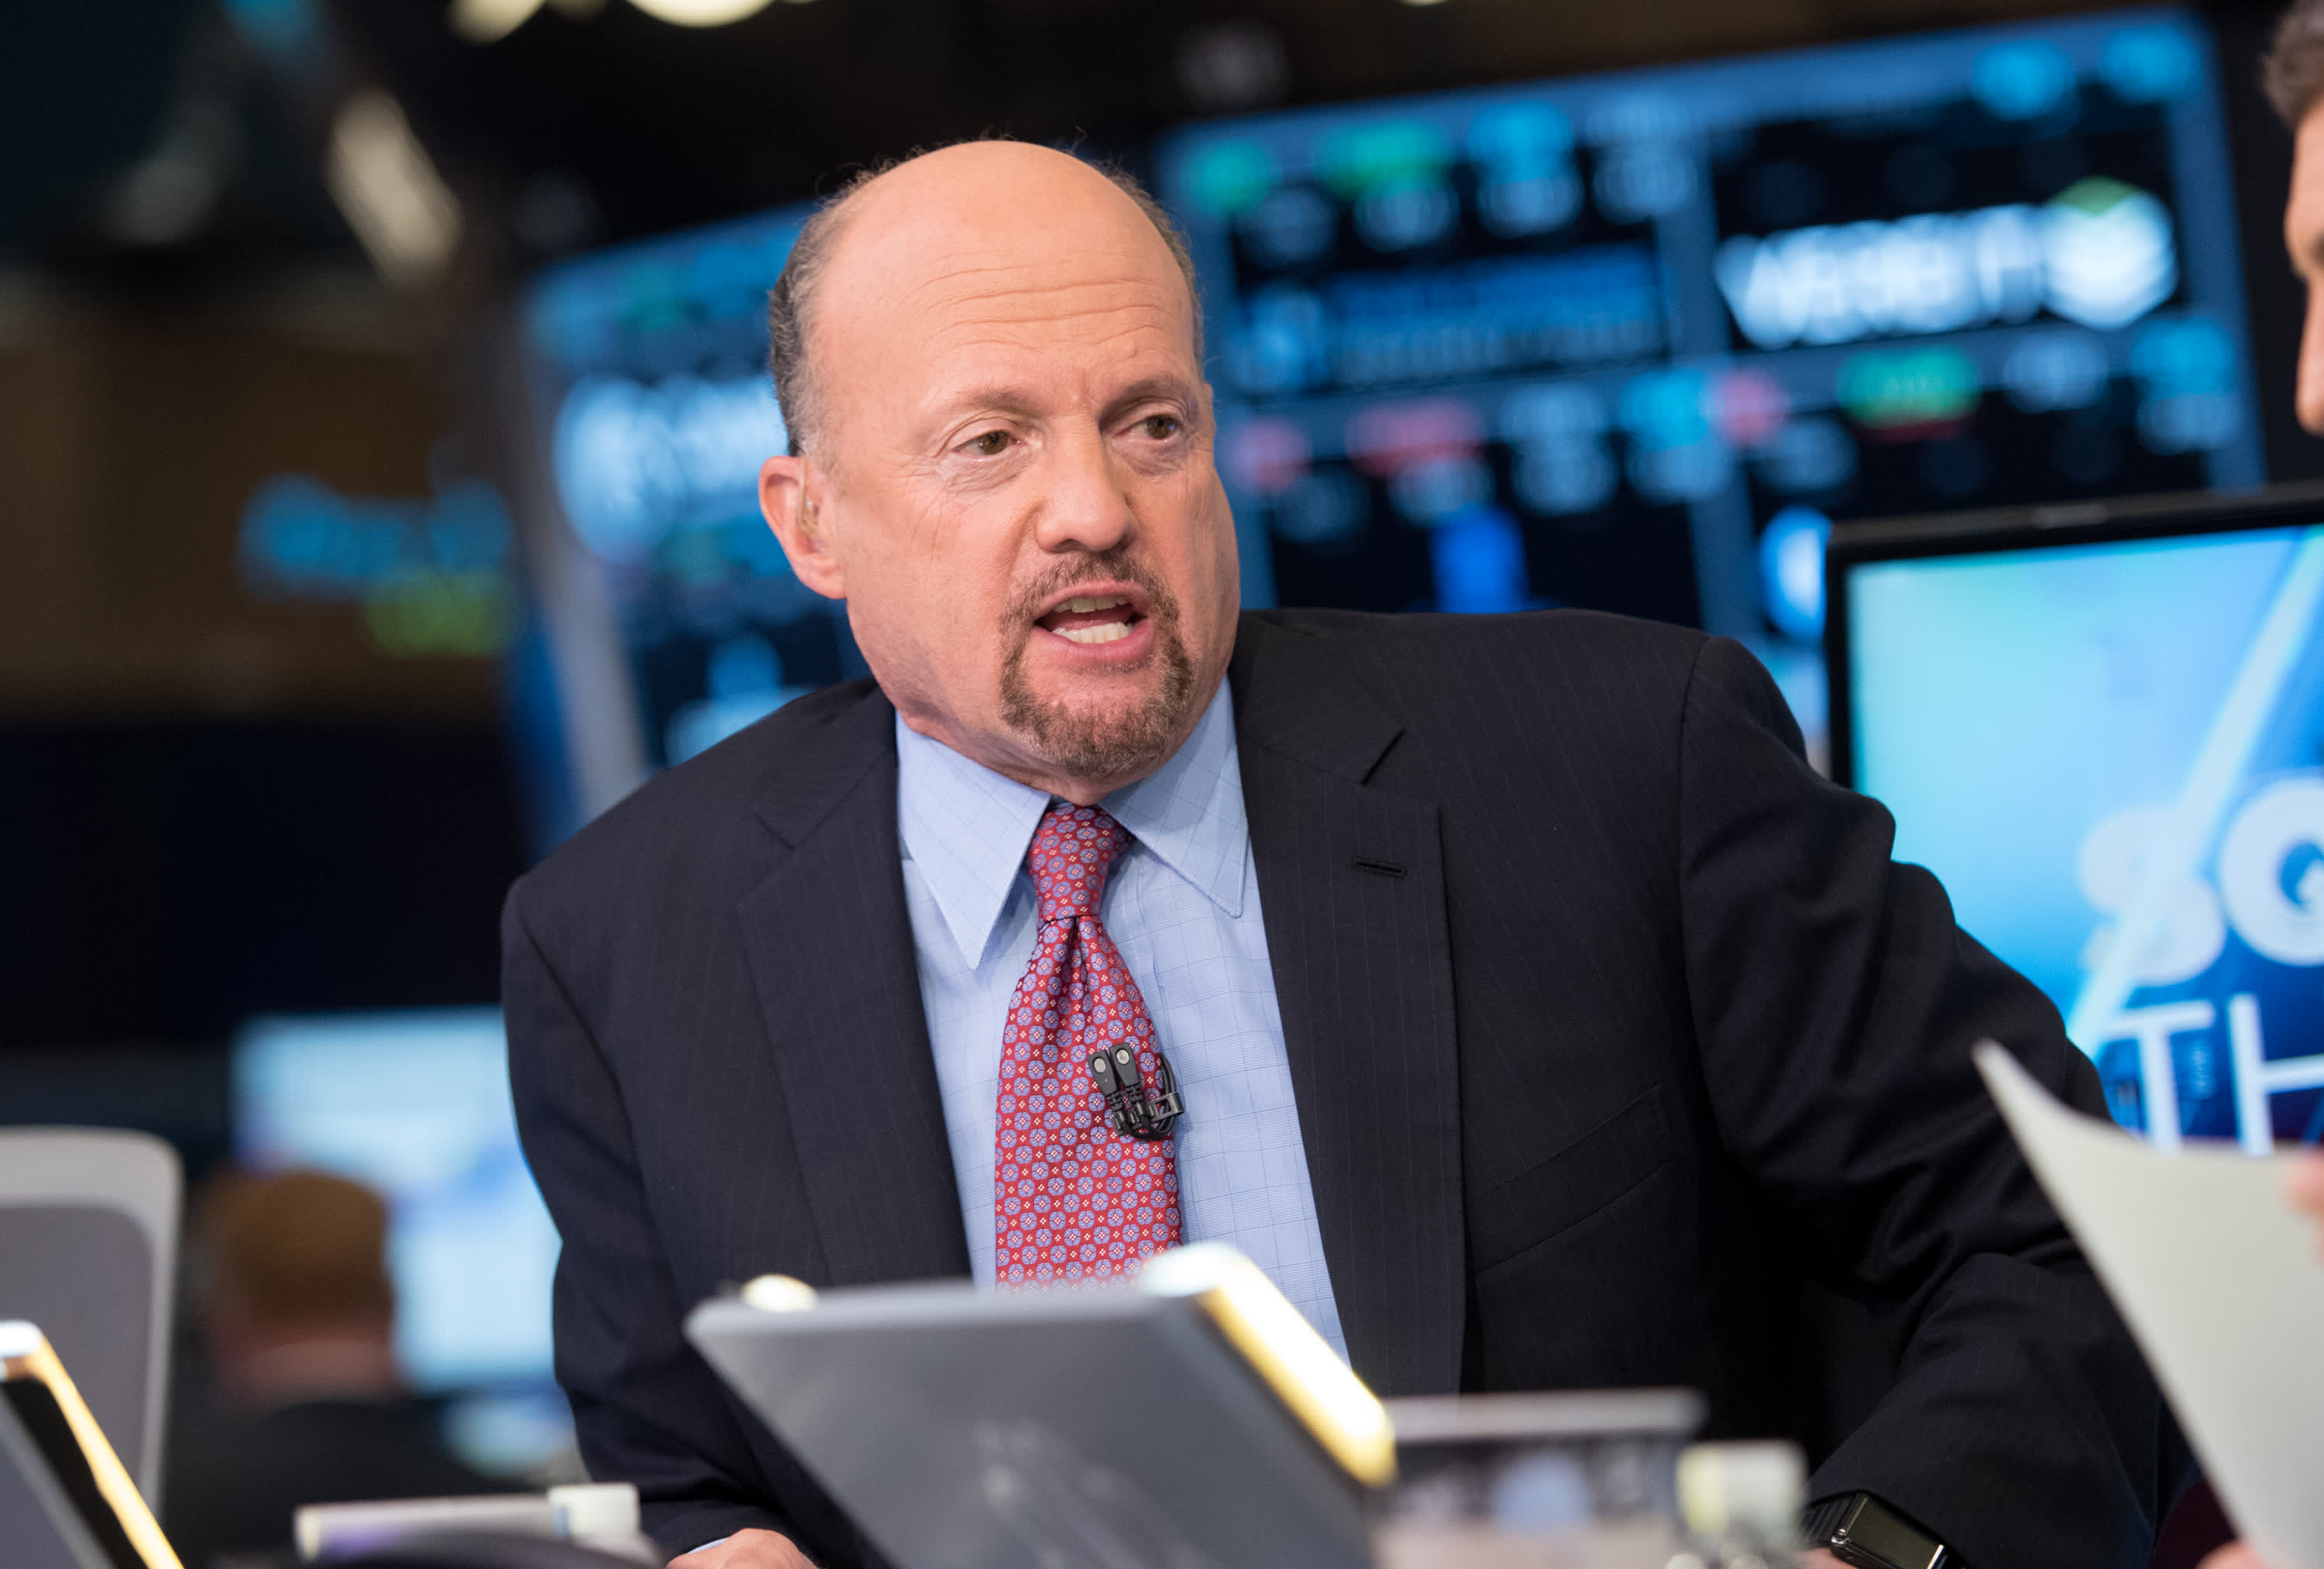 The problem with Gen Z is that they're 'not frugal,' says Jim Cramer